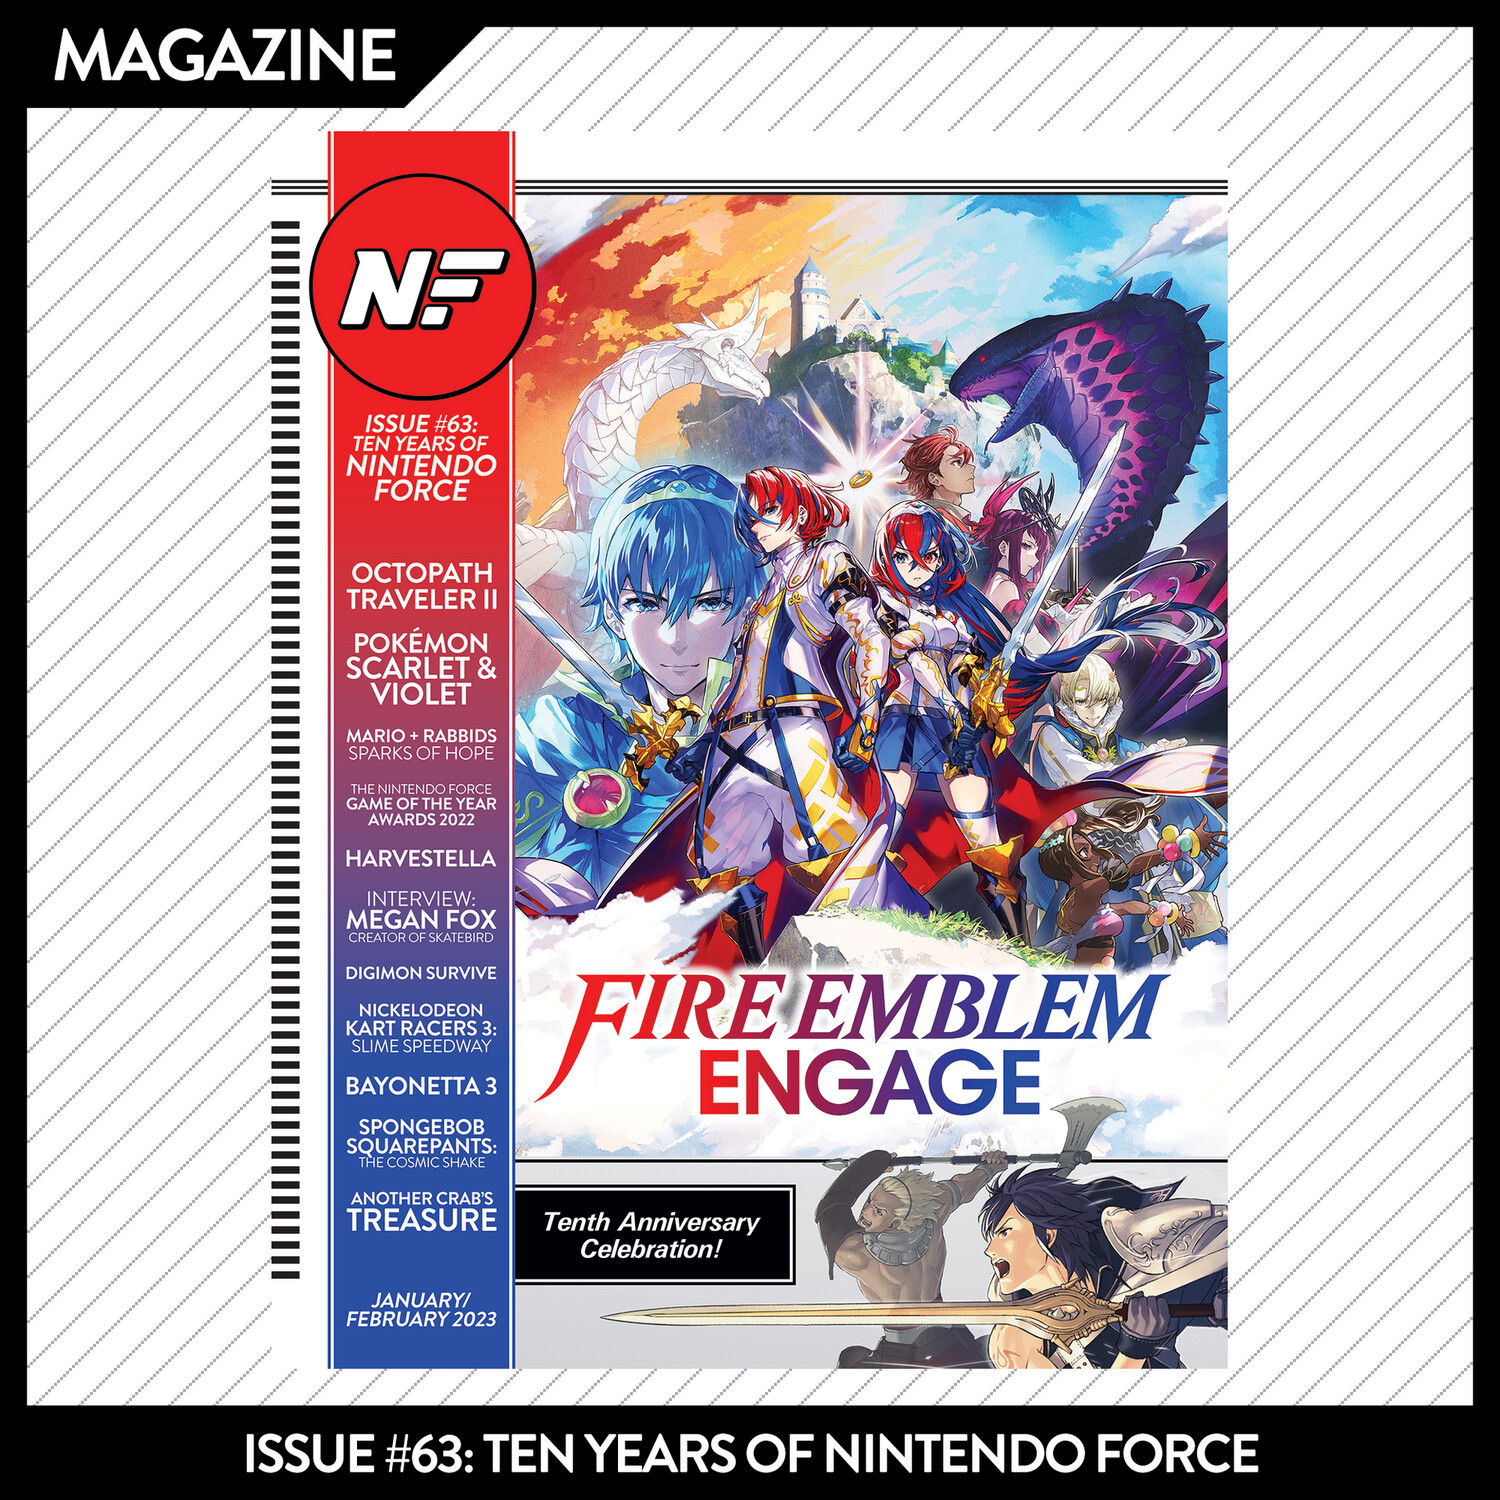 Issue #63: Ten Years of Nintendo Force – January/February 2023